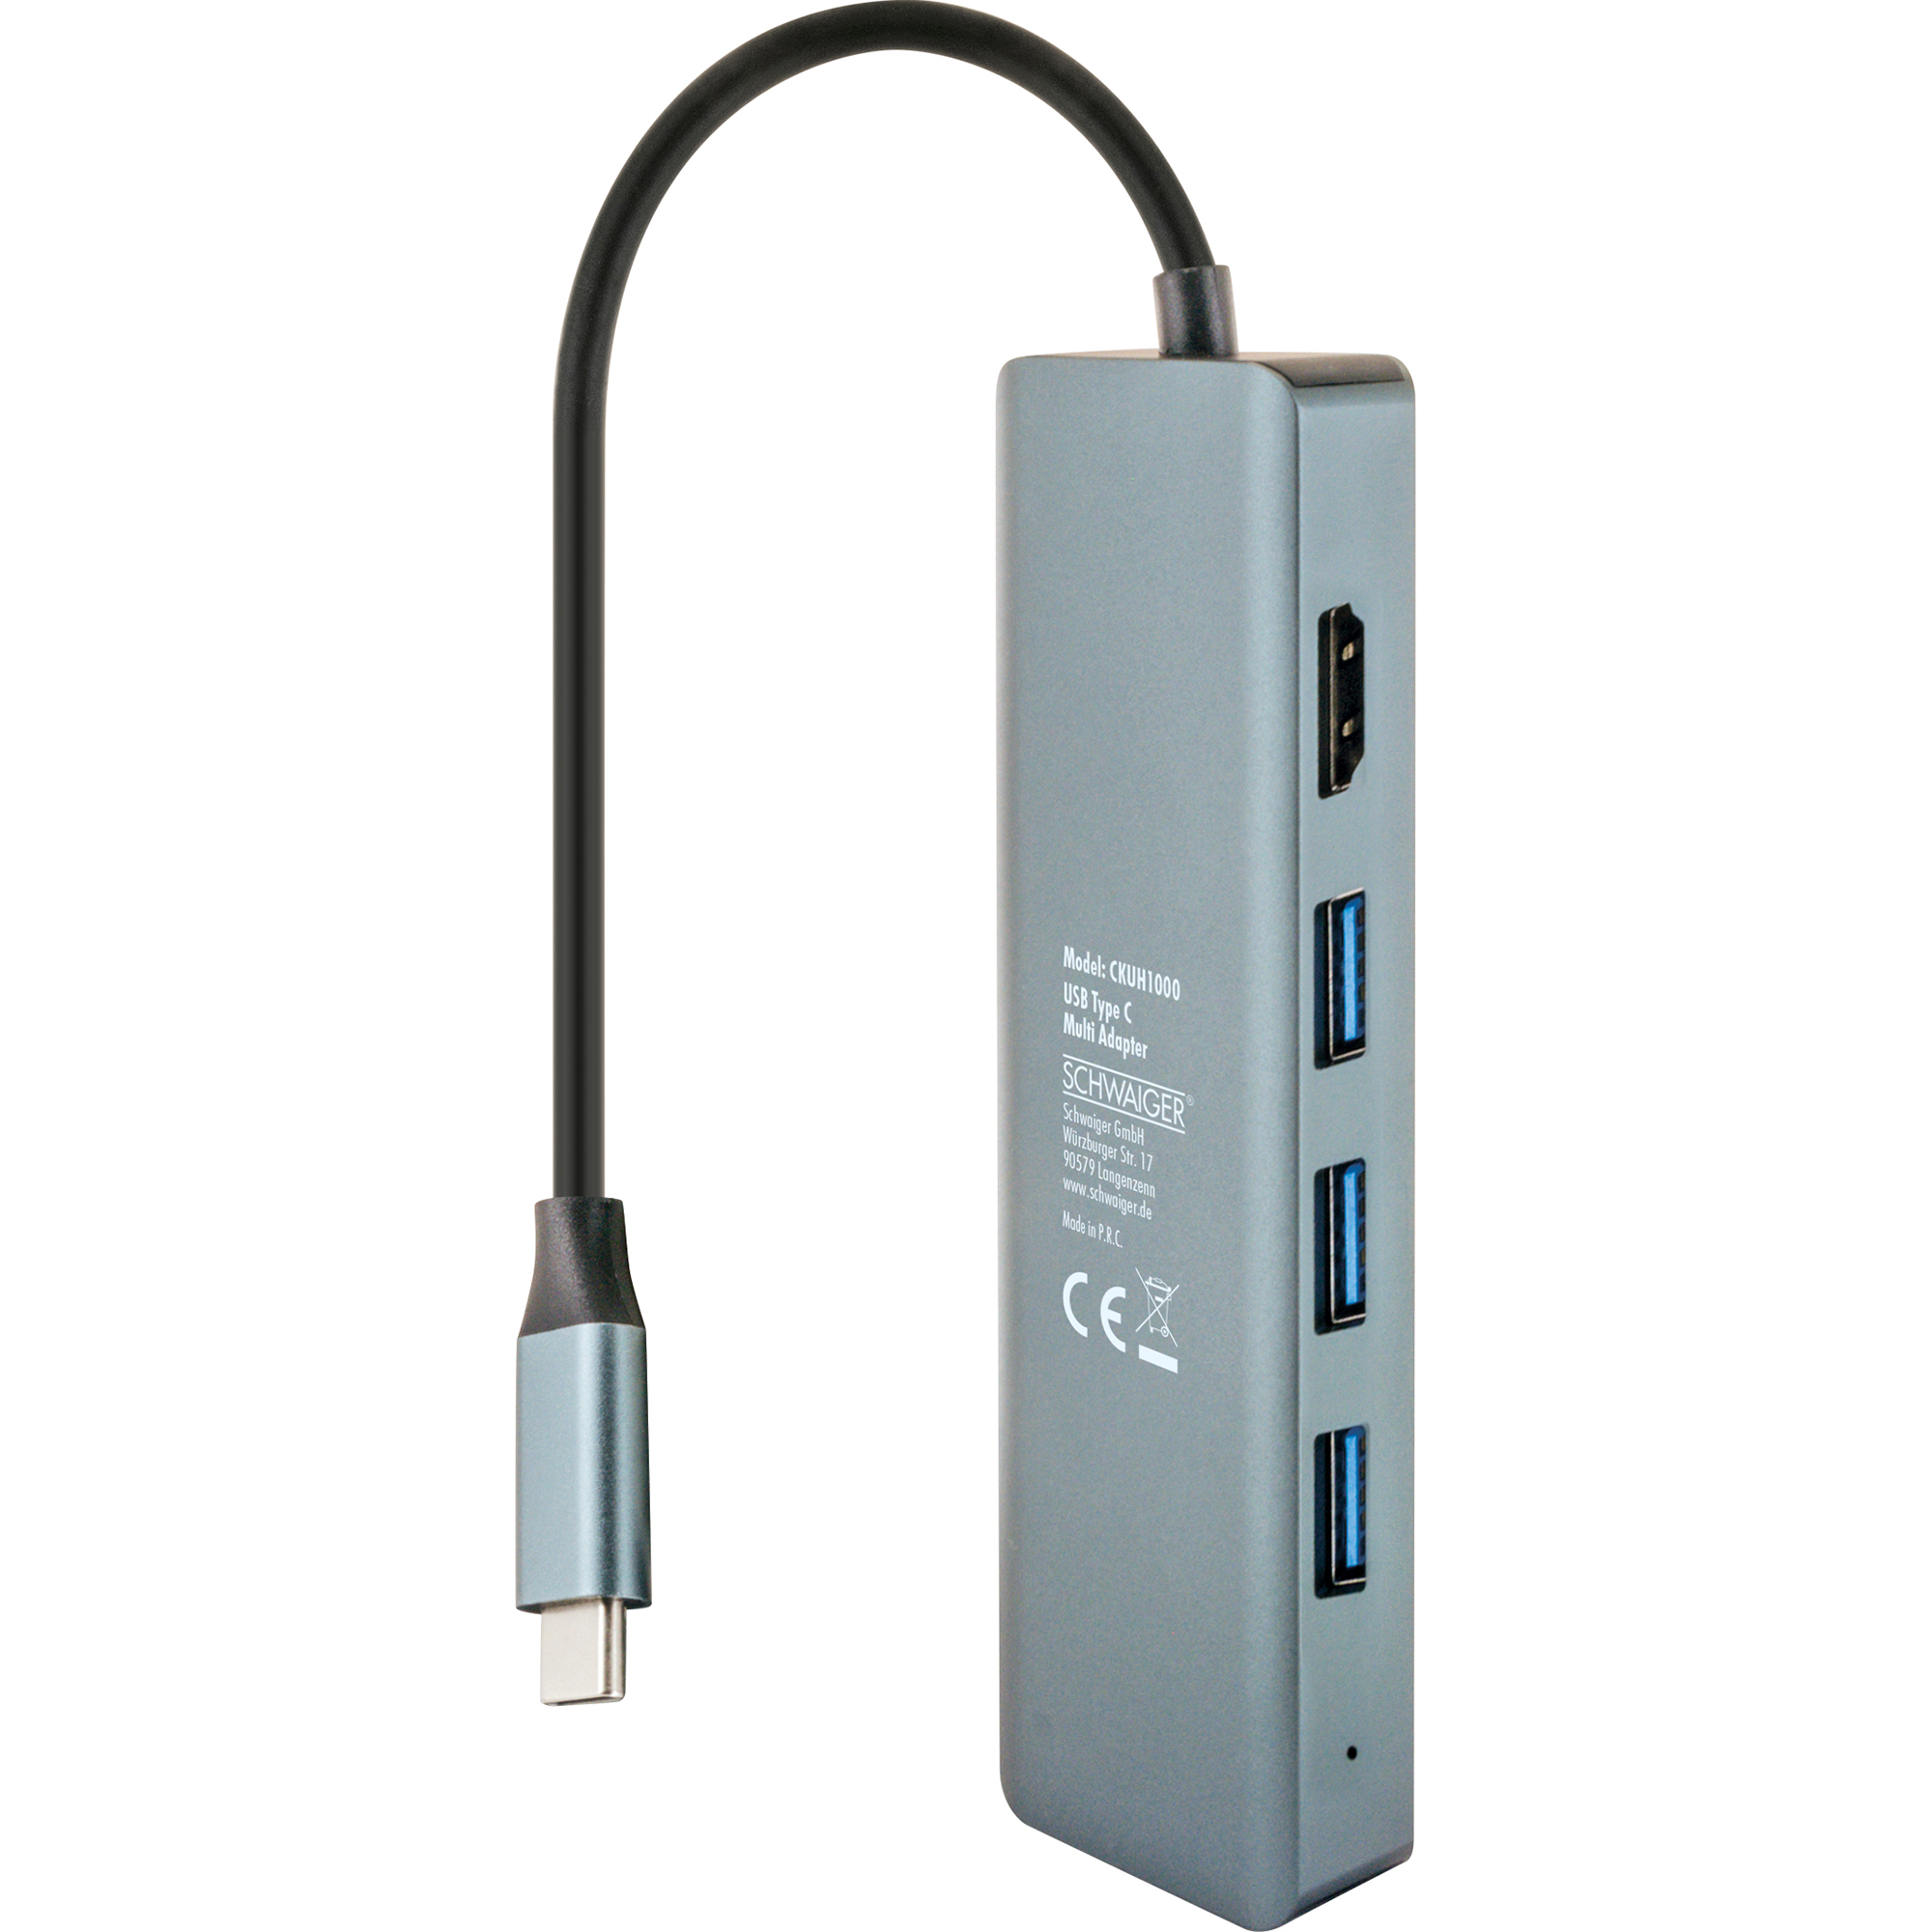 USB 3.0 HUB schwarz 4-fach + product picture